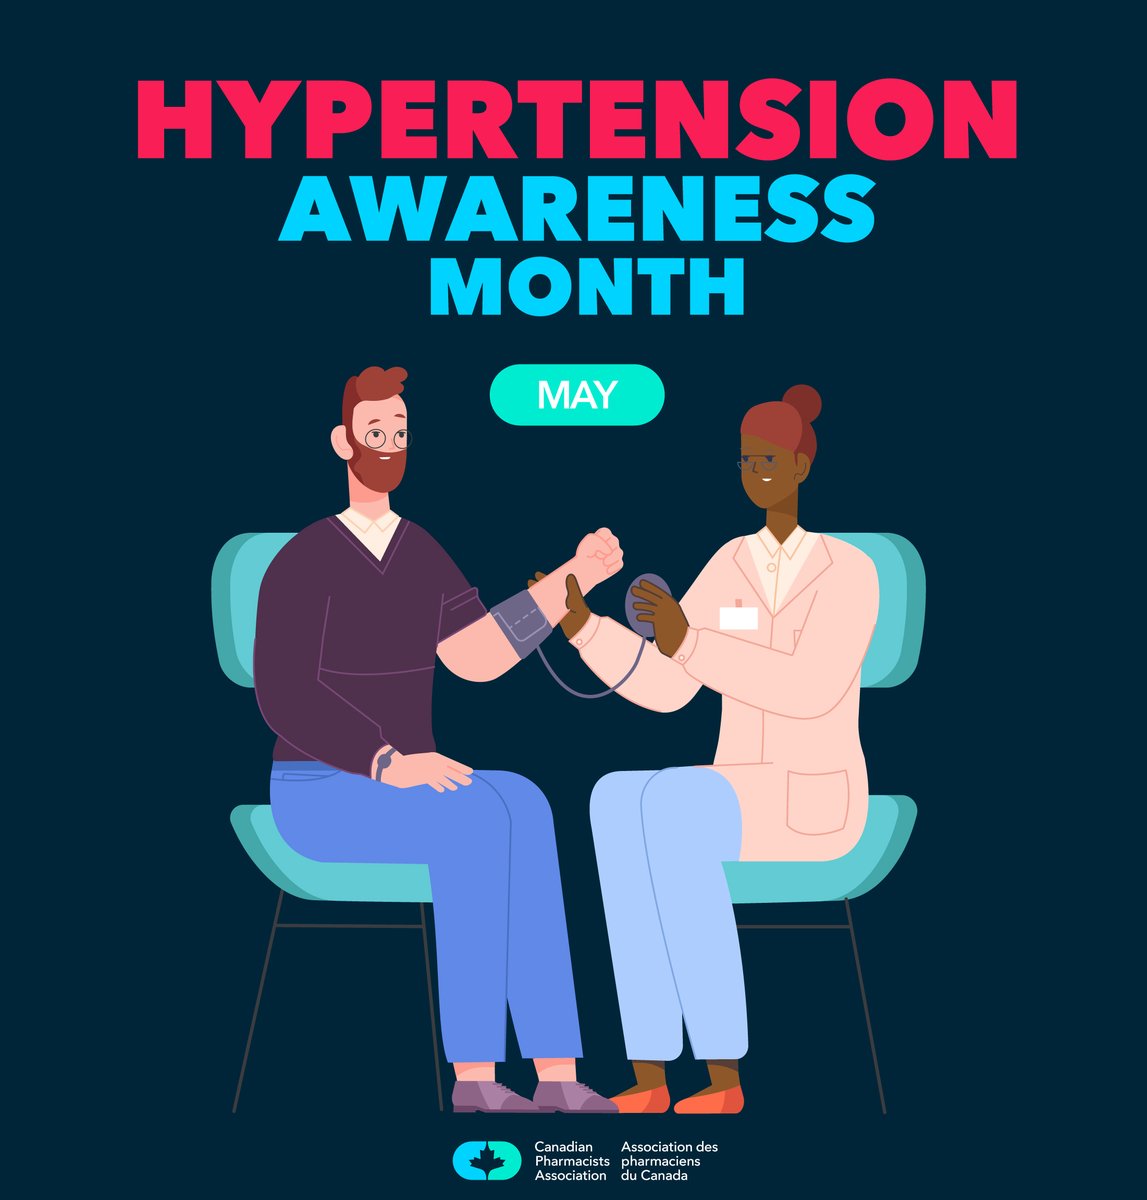 May is #Hypertension Awareness Month! #DidYouKnow that #pharmacy professionals can play an essential role caring for patients with hypertension? #AskYourPharmacist about how they can help you manage your blood pressure and medications!